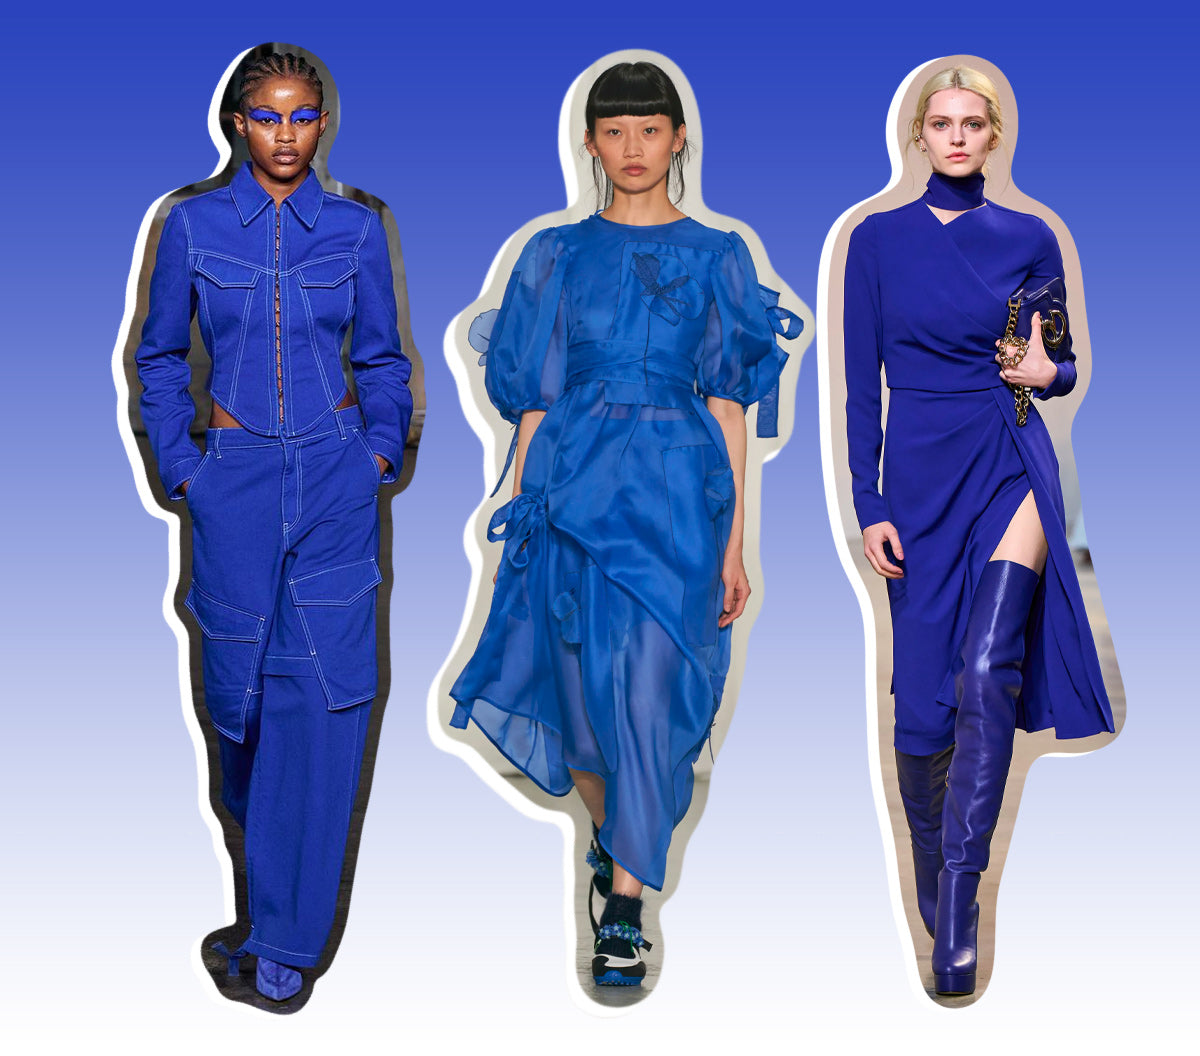 Shop Trending Cobalt Blue Styles at French Cuff Boutique | Fall/Winter 2022 Fashion Trends